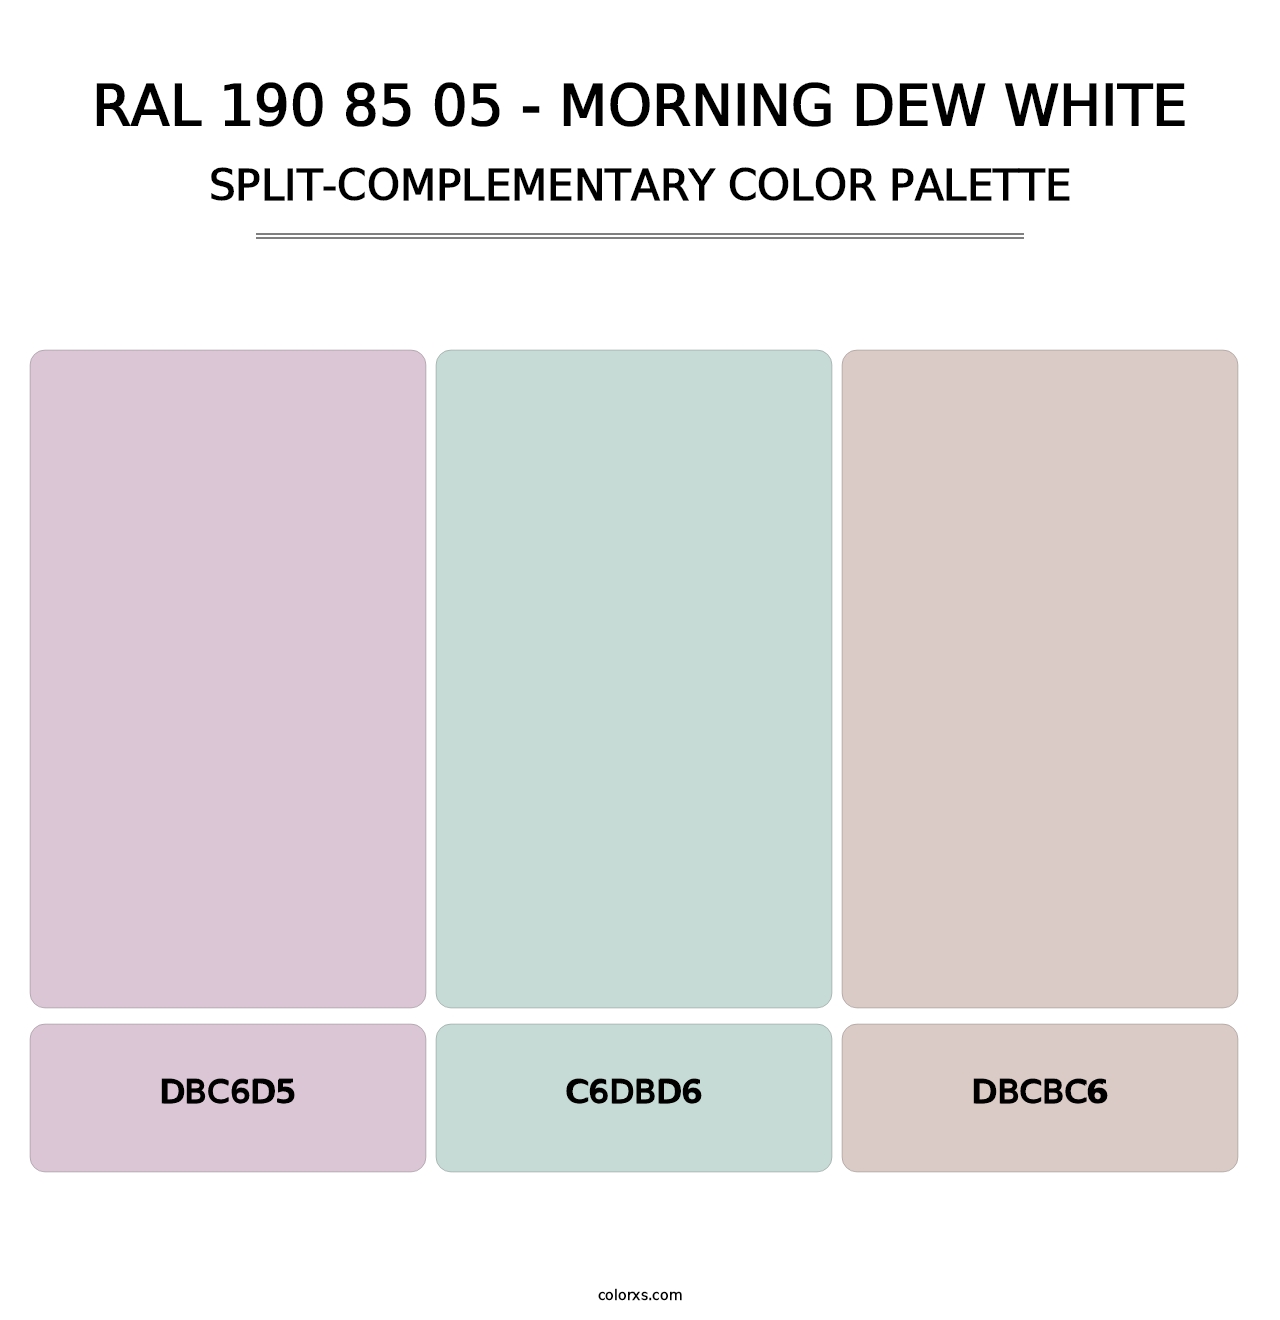 RAL 190 85 05 - Morning Dew White - Split-Complementary Color Palette